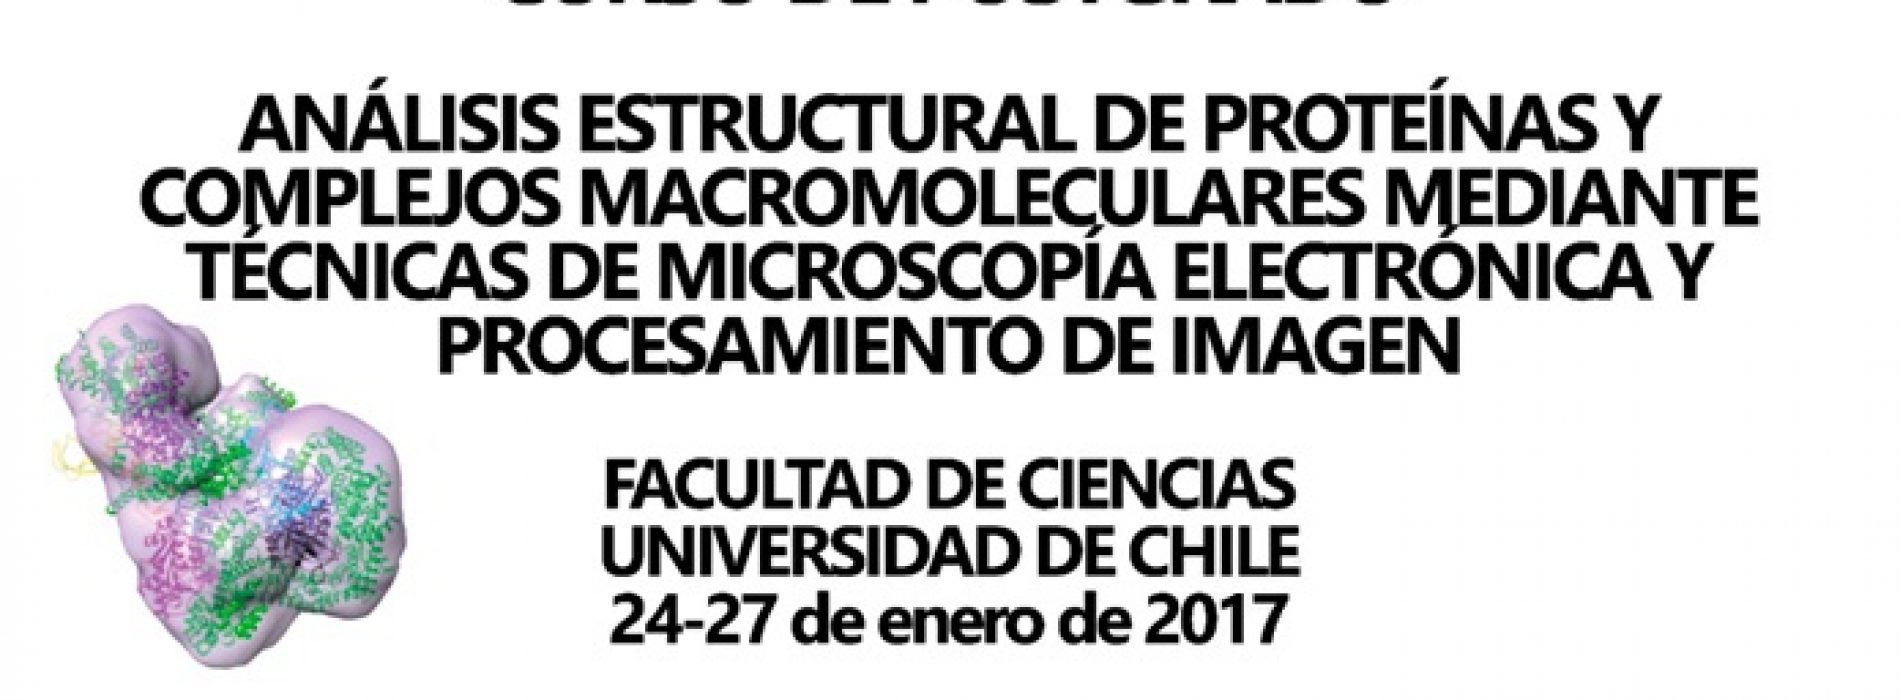 Postgraduate course "Structural analysis of proteins and macromolecular complexes using electron microscopy and image processing techniques".